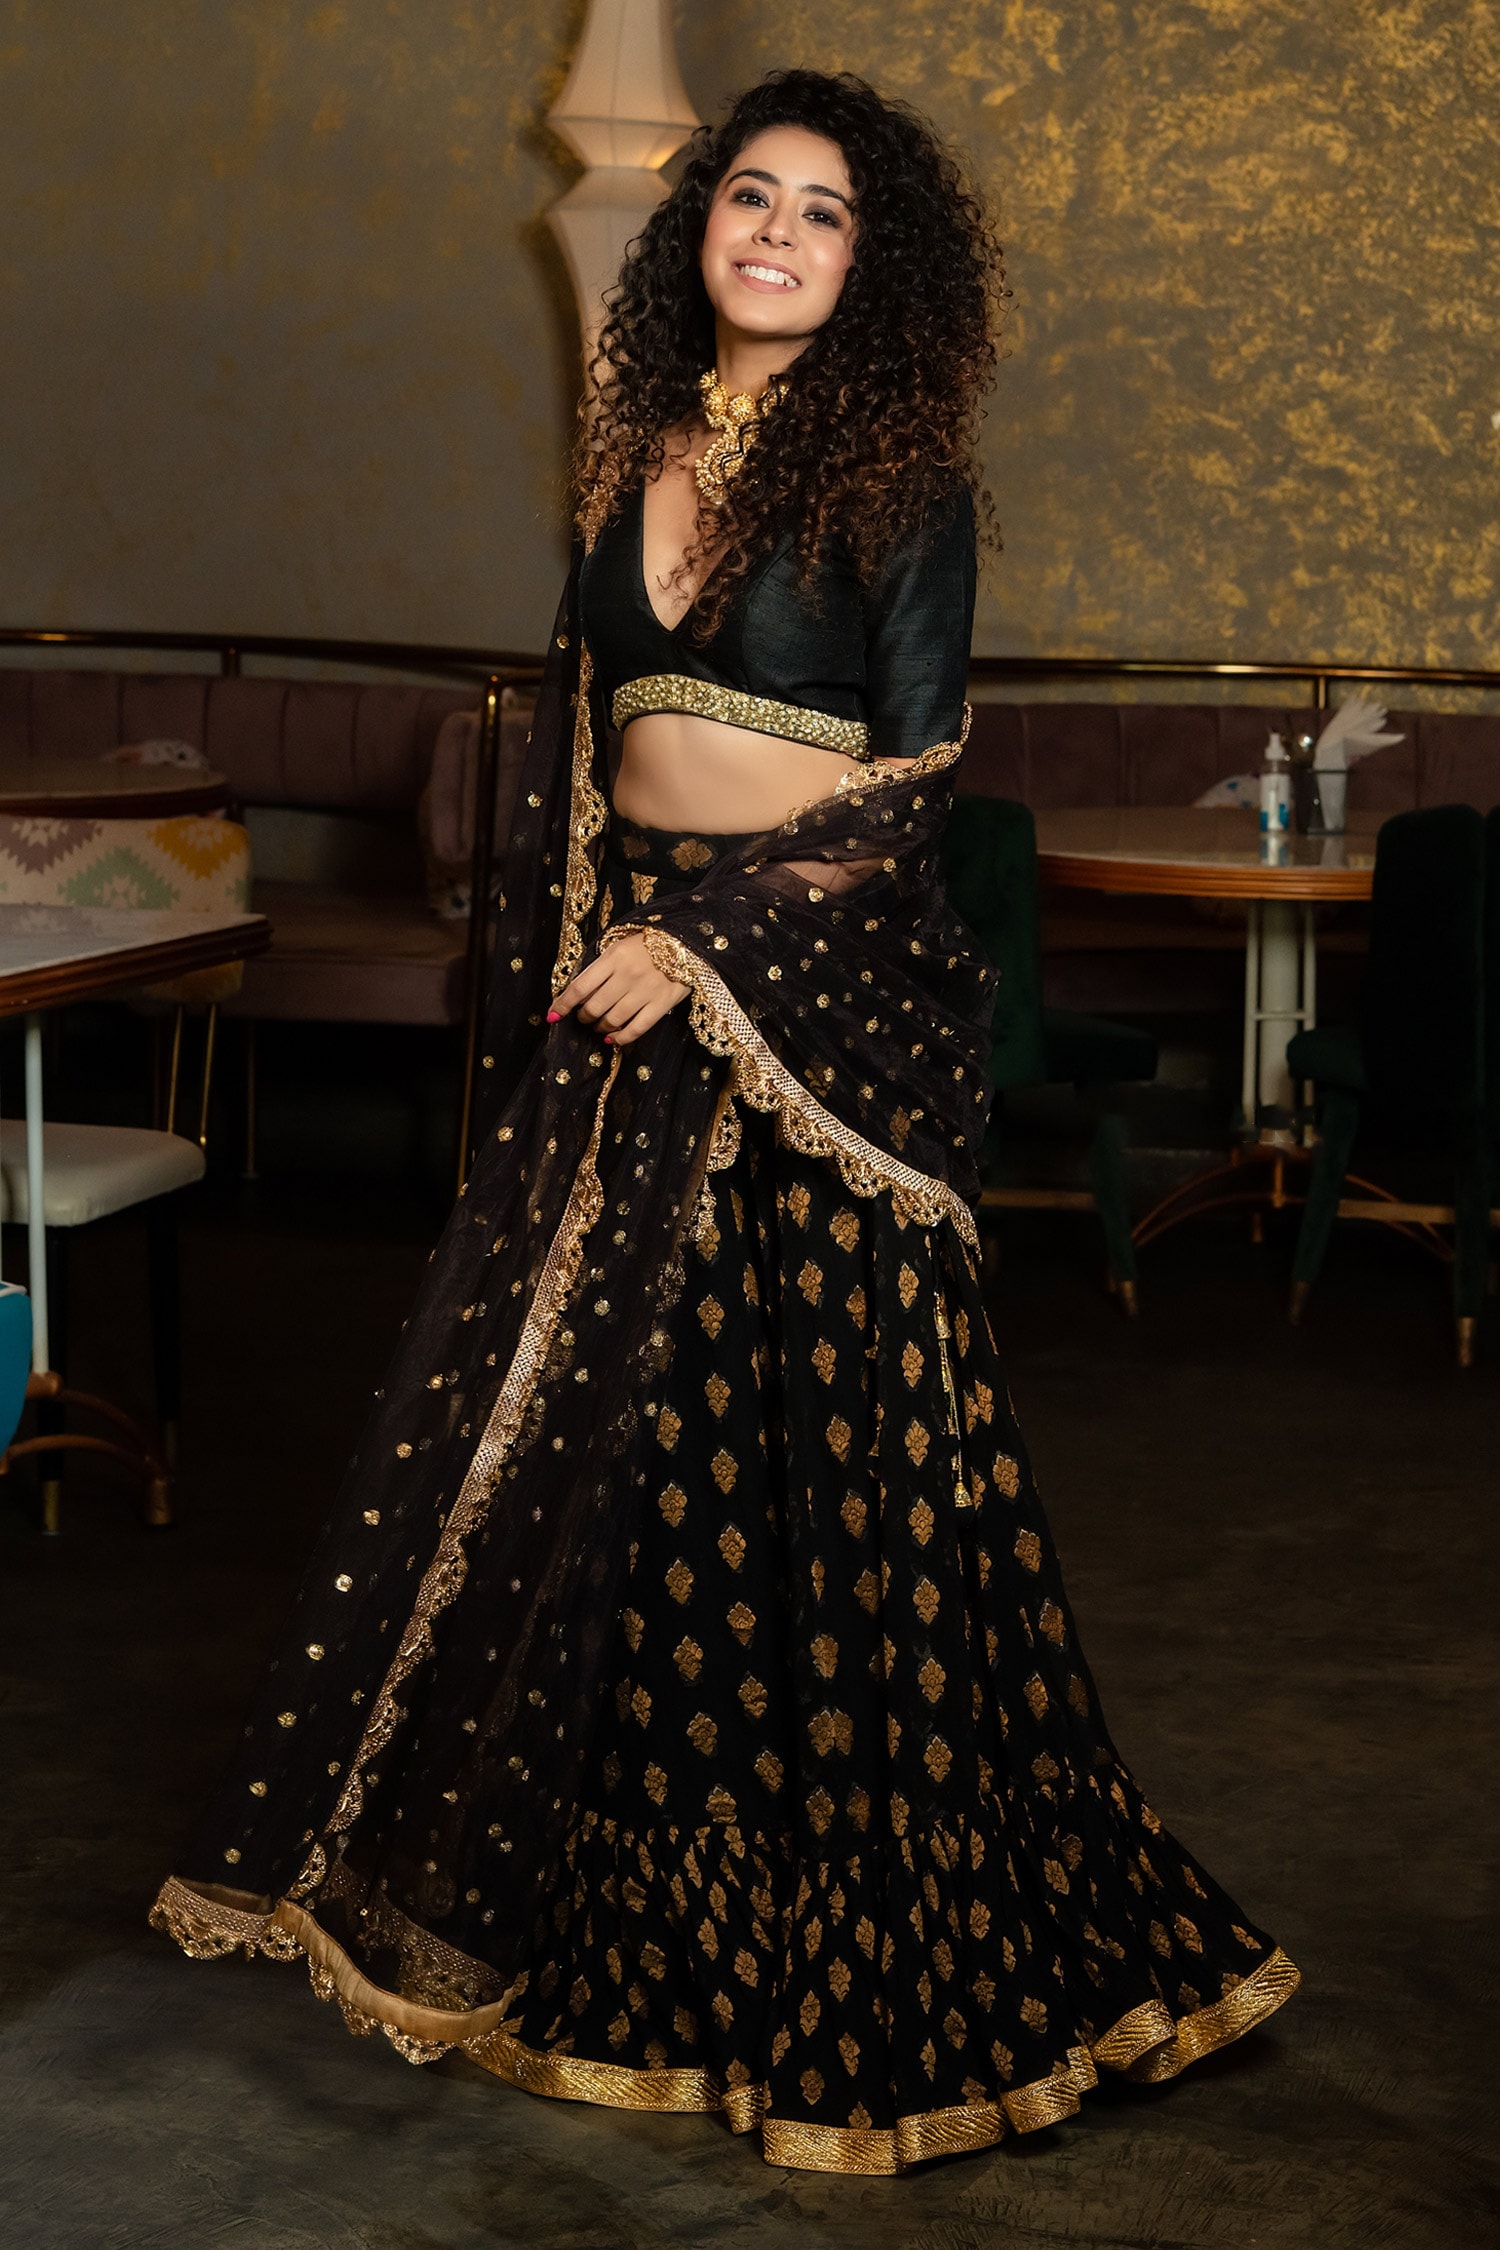 Kiara Advani's black embellished lehenga is the easiest cocktail outfit you  can find | VOGUE India